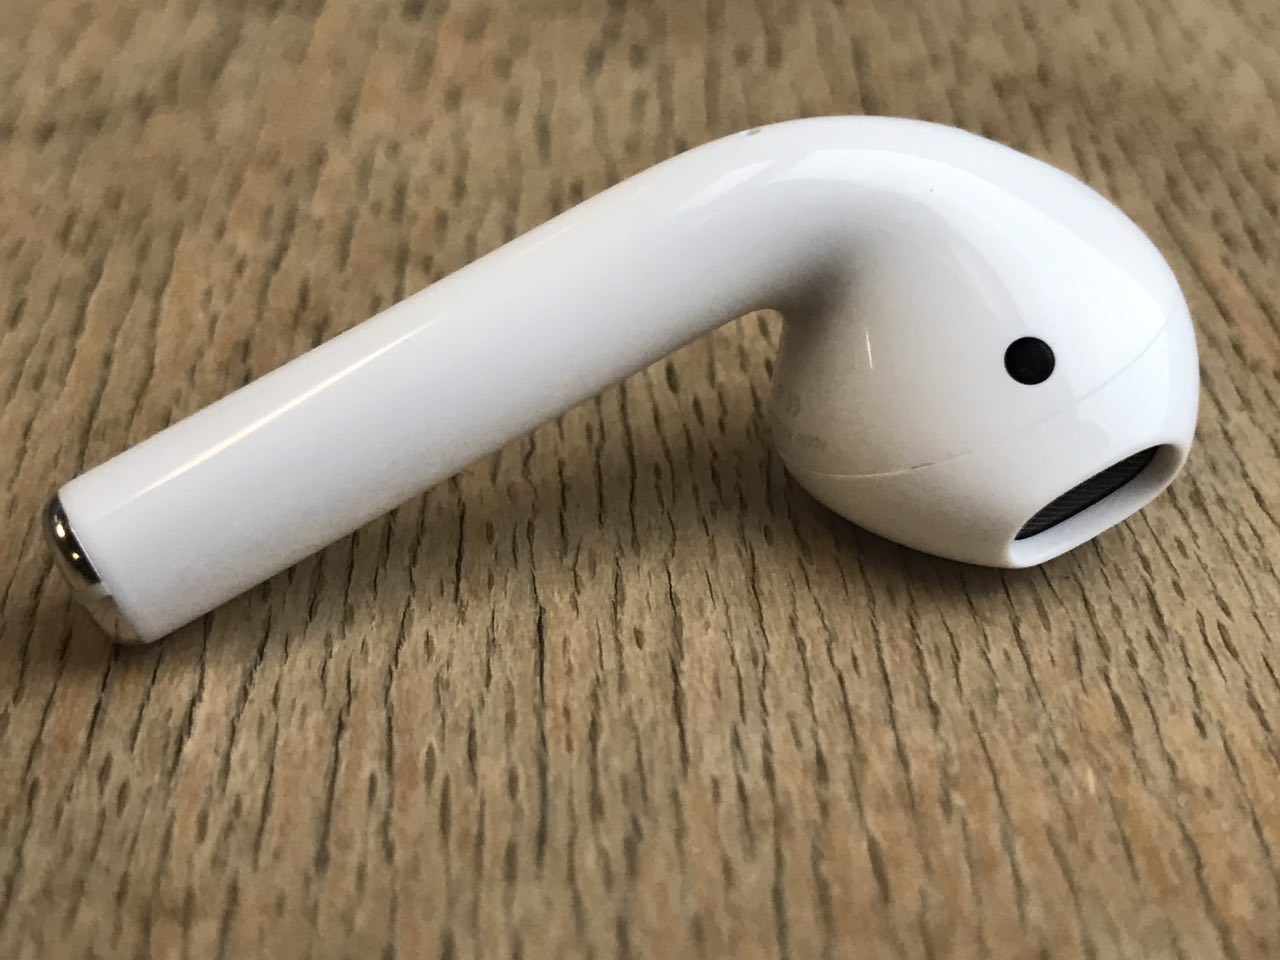 unboxing airpods